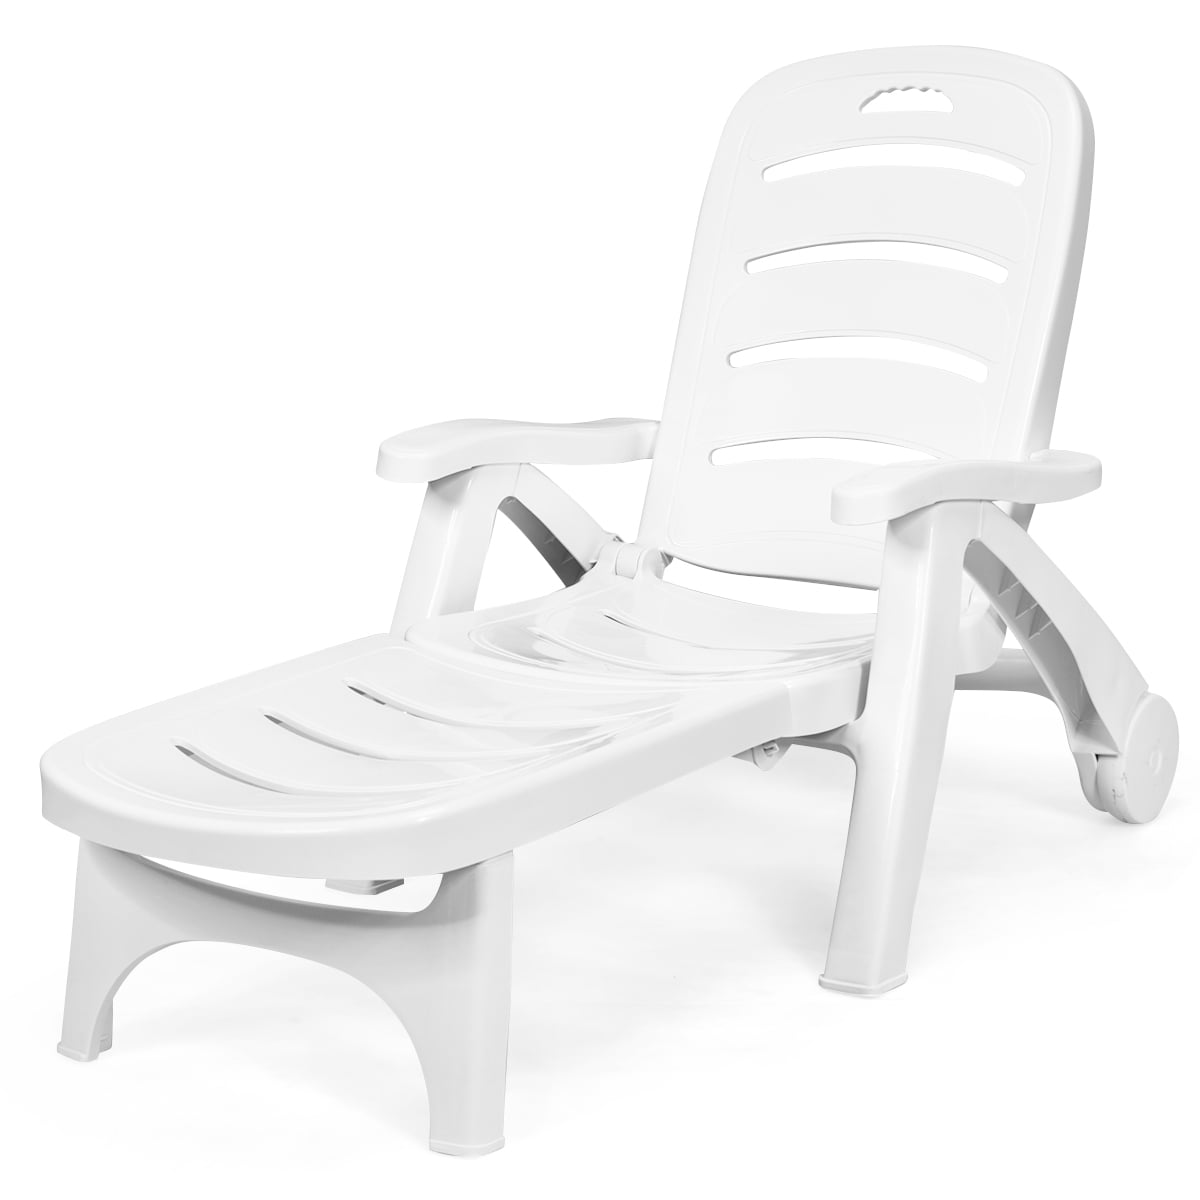 Patiojoy Outdoor Chaise Lounge Chair 5-Position Folding Recliner for ...